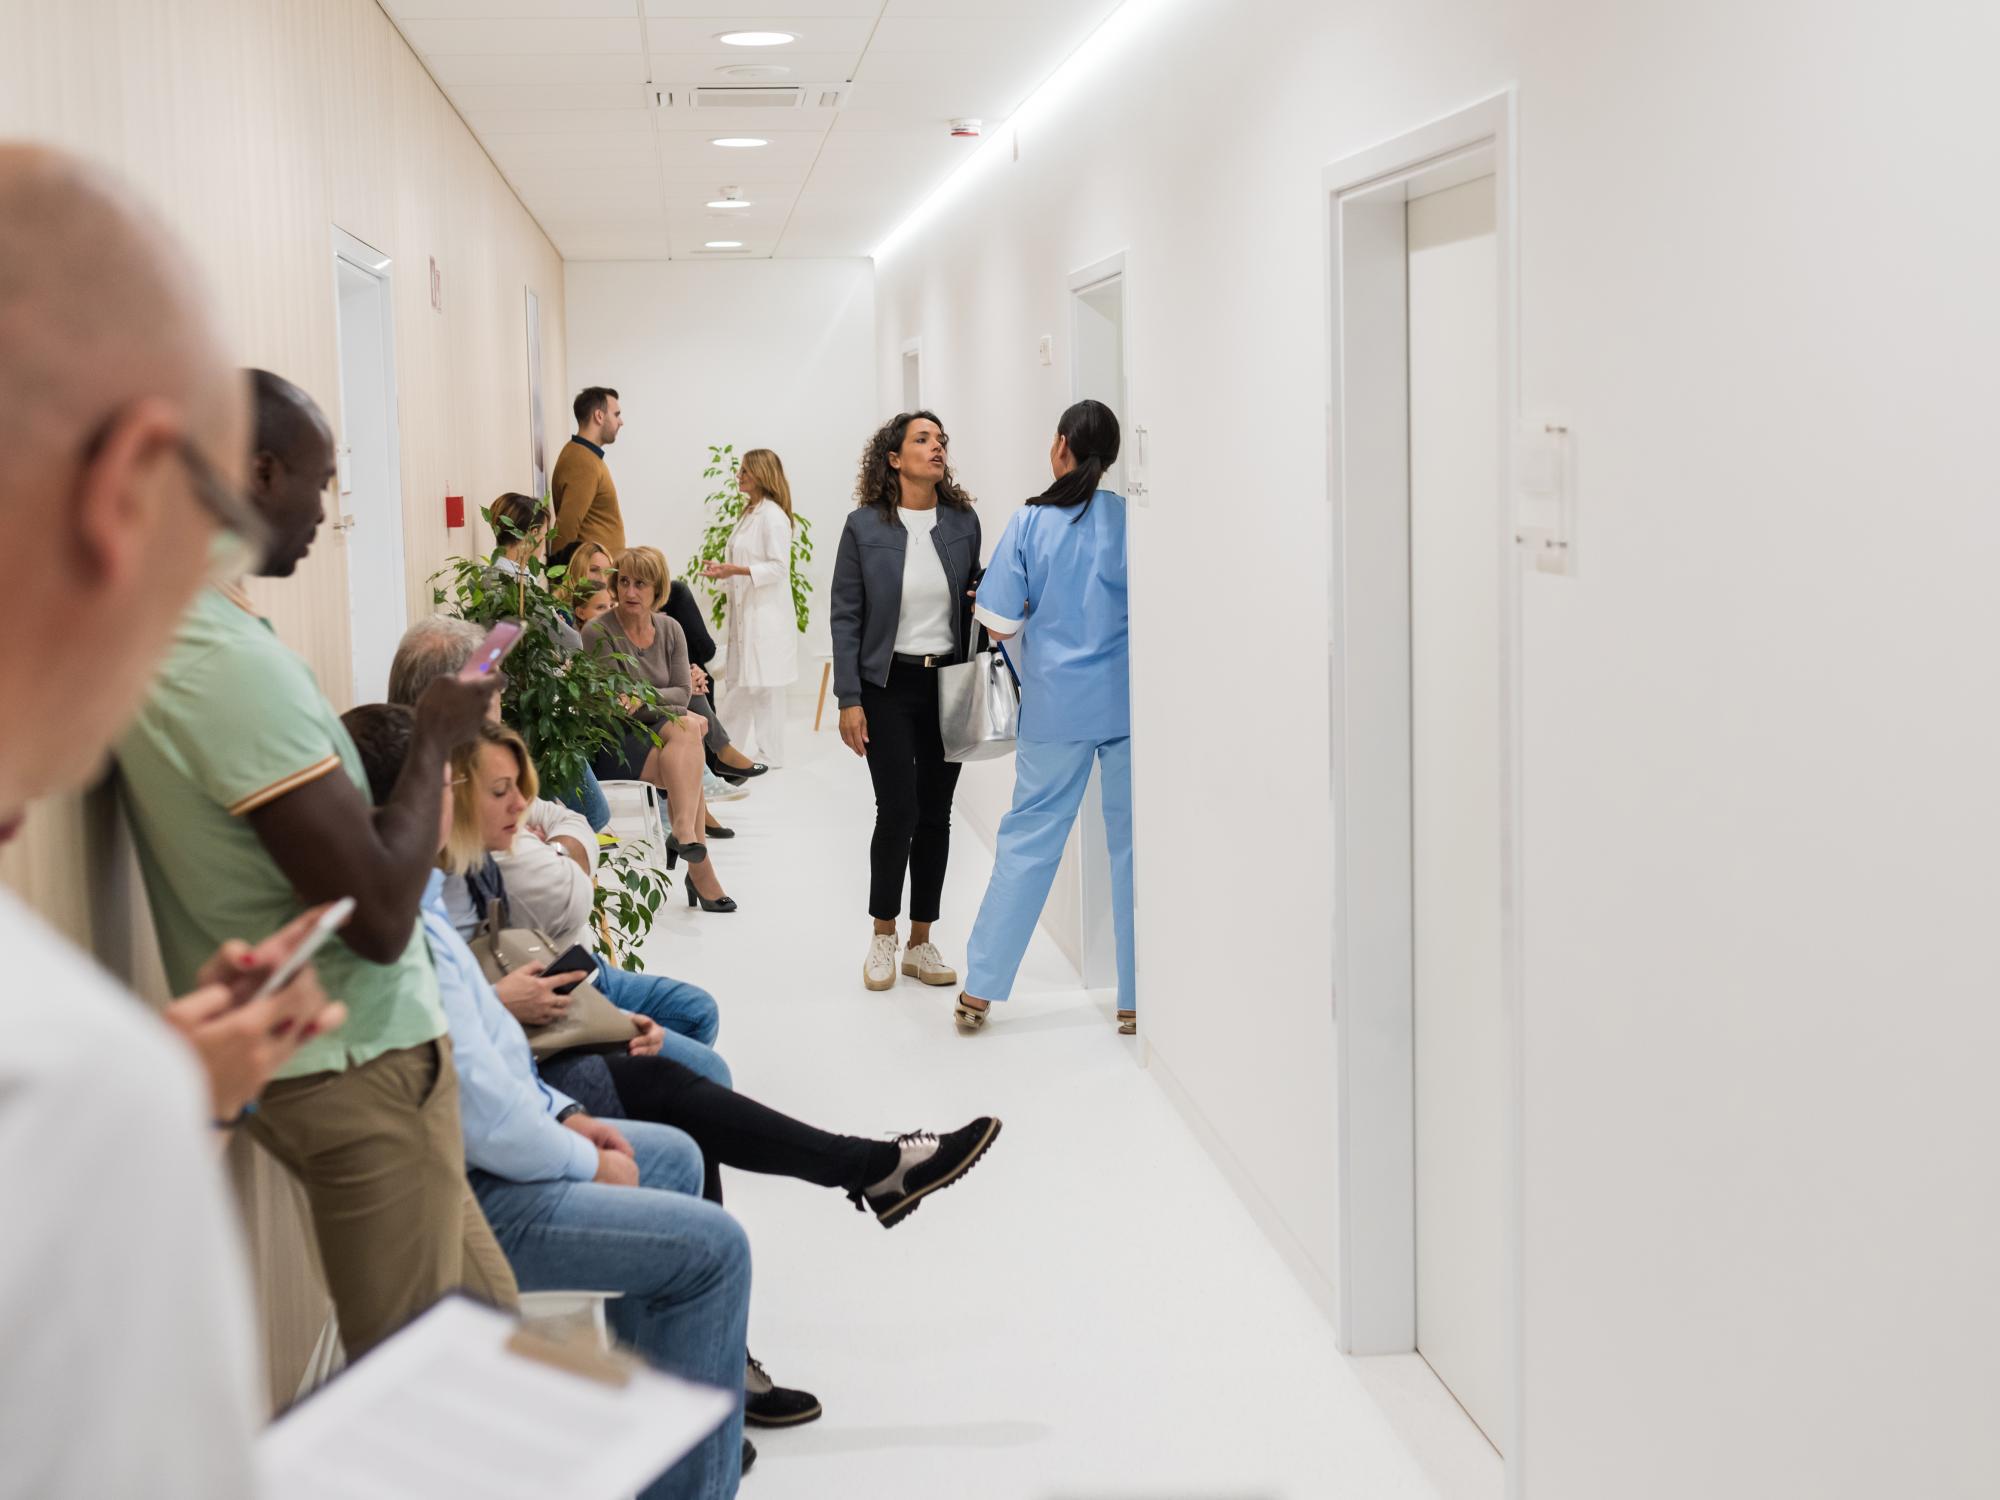 Crowded Emergency Departments May Affect Patients Throughout the Hospital